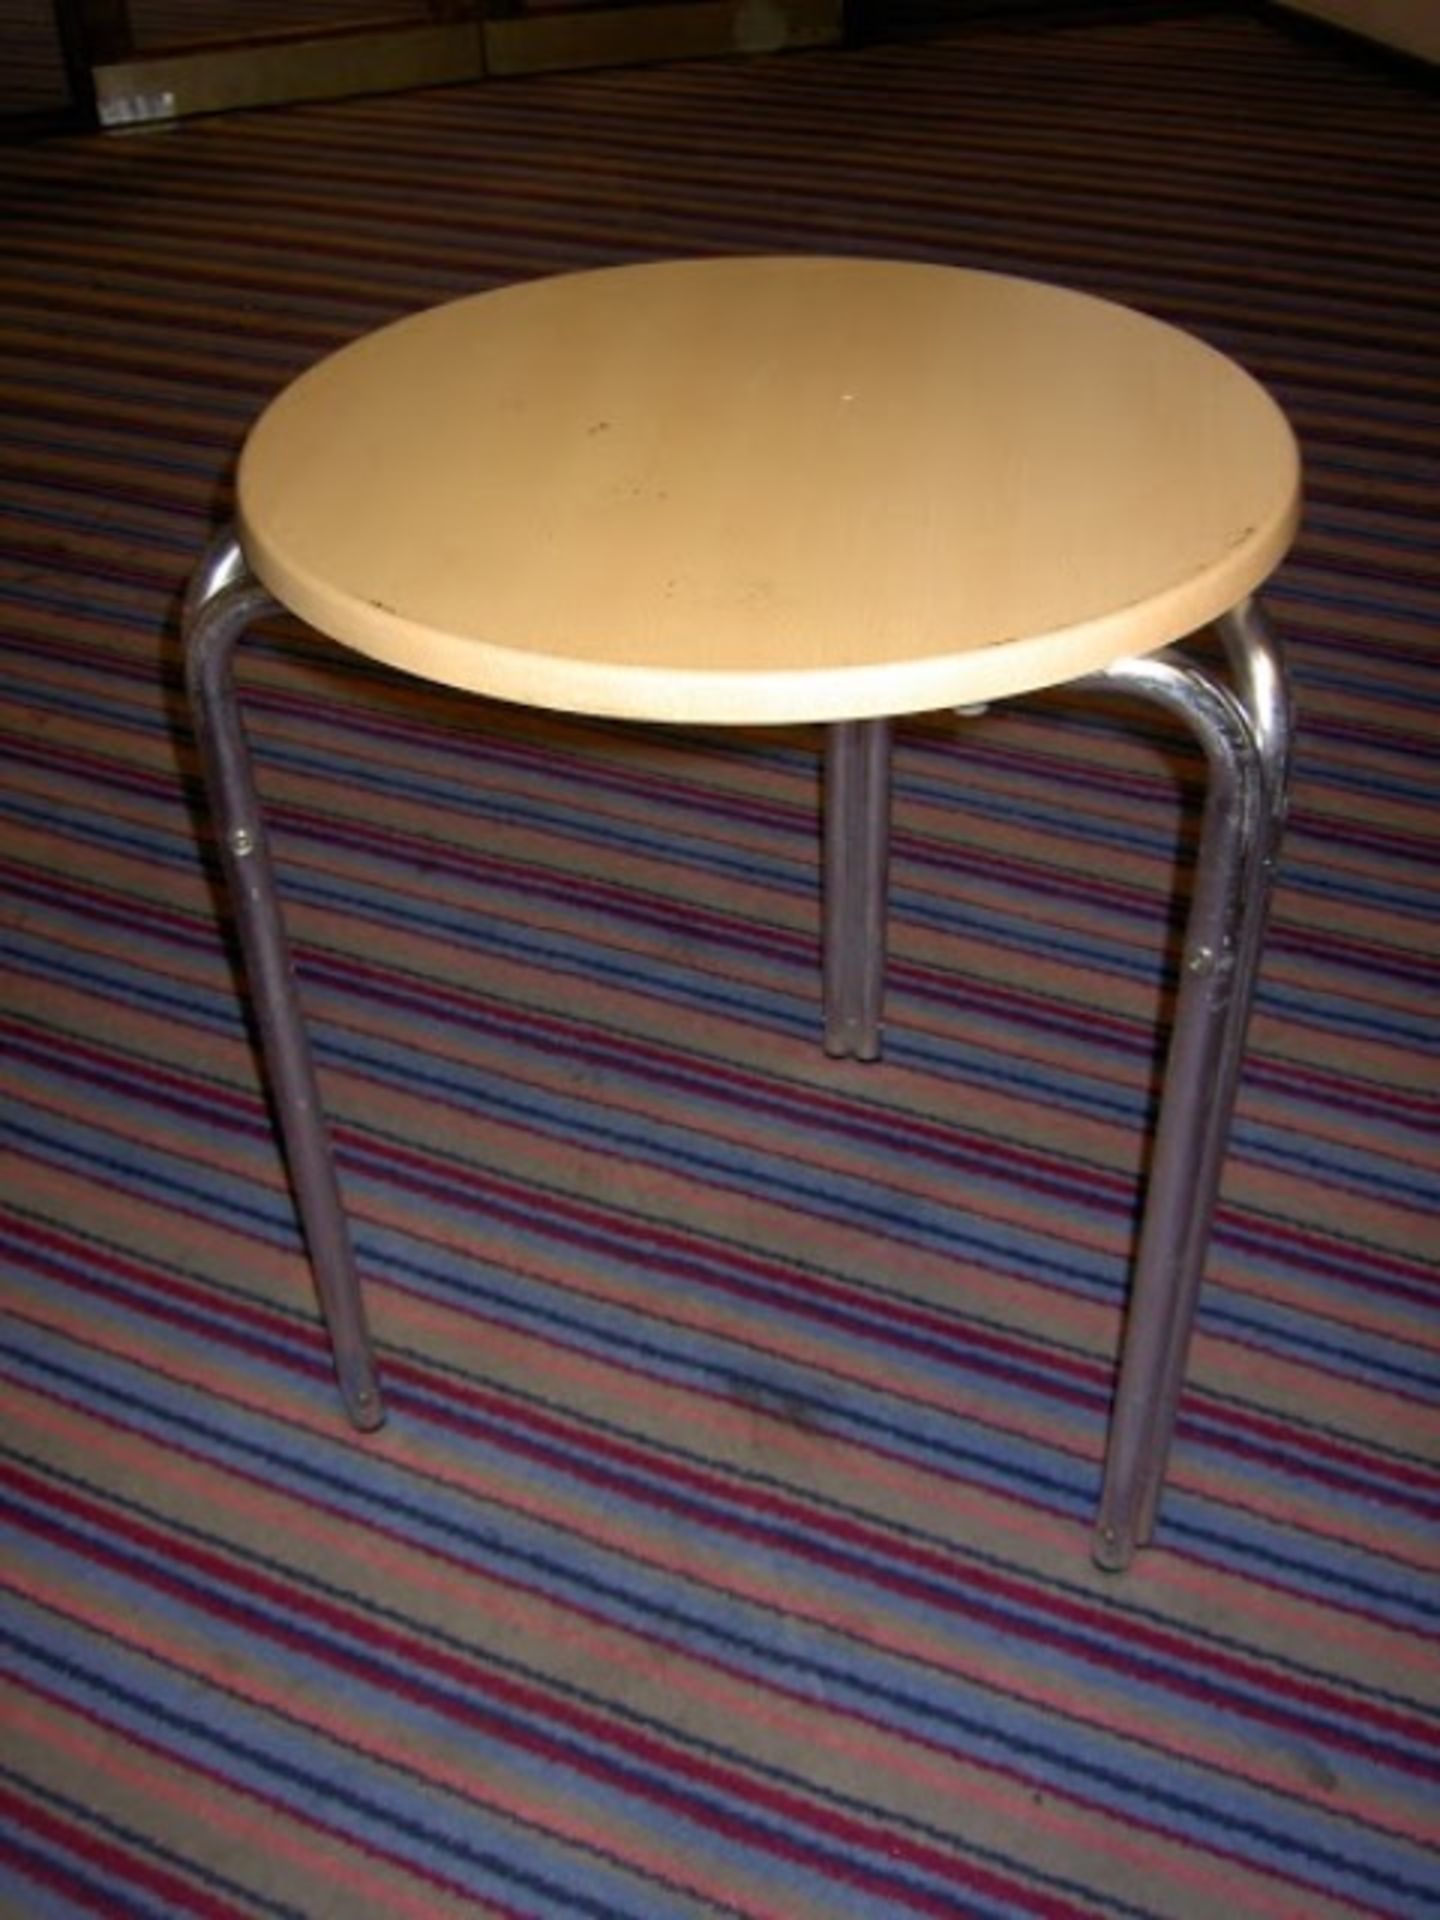 Five sapele 2' diameter chrome framed tables (Please note: Images have been provided as a guide only